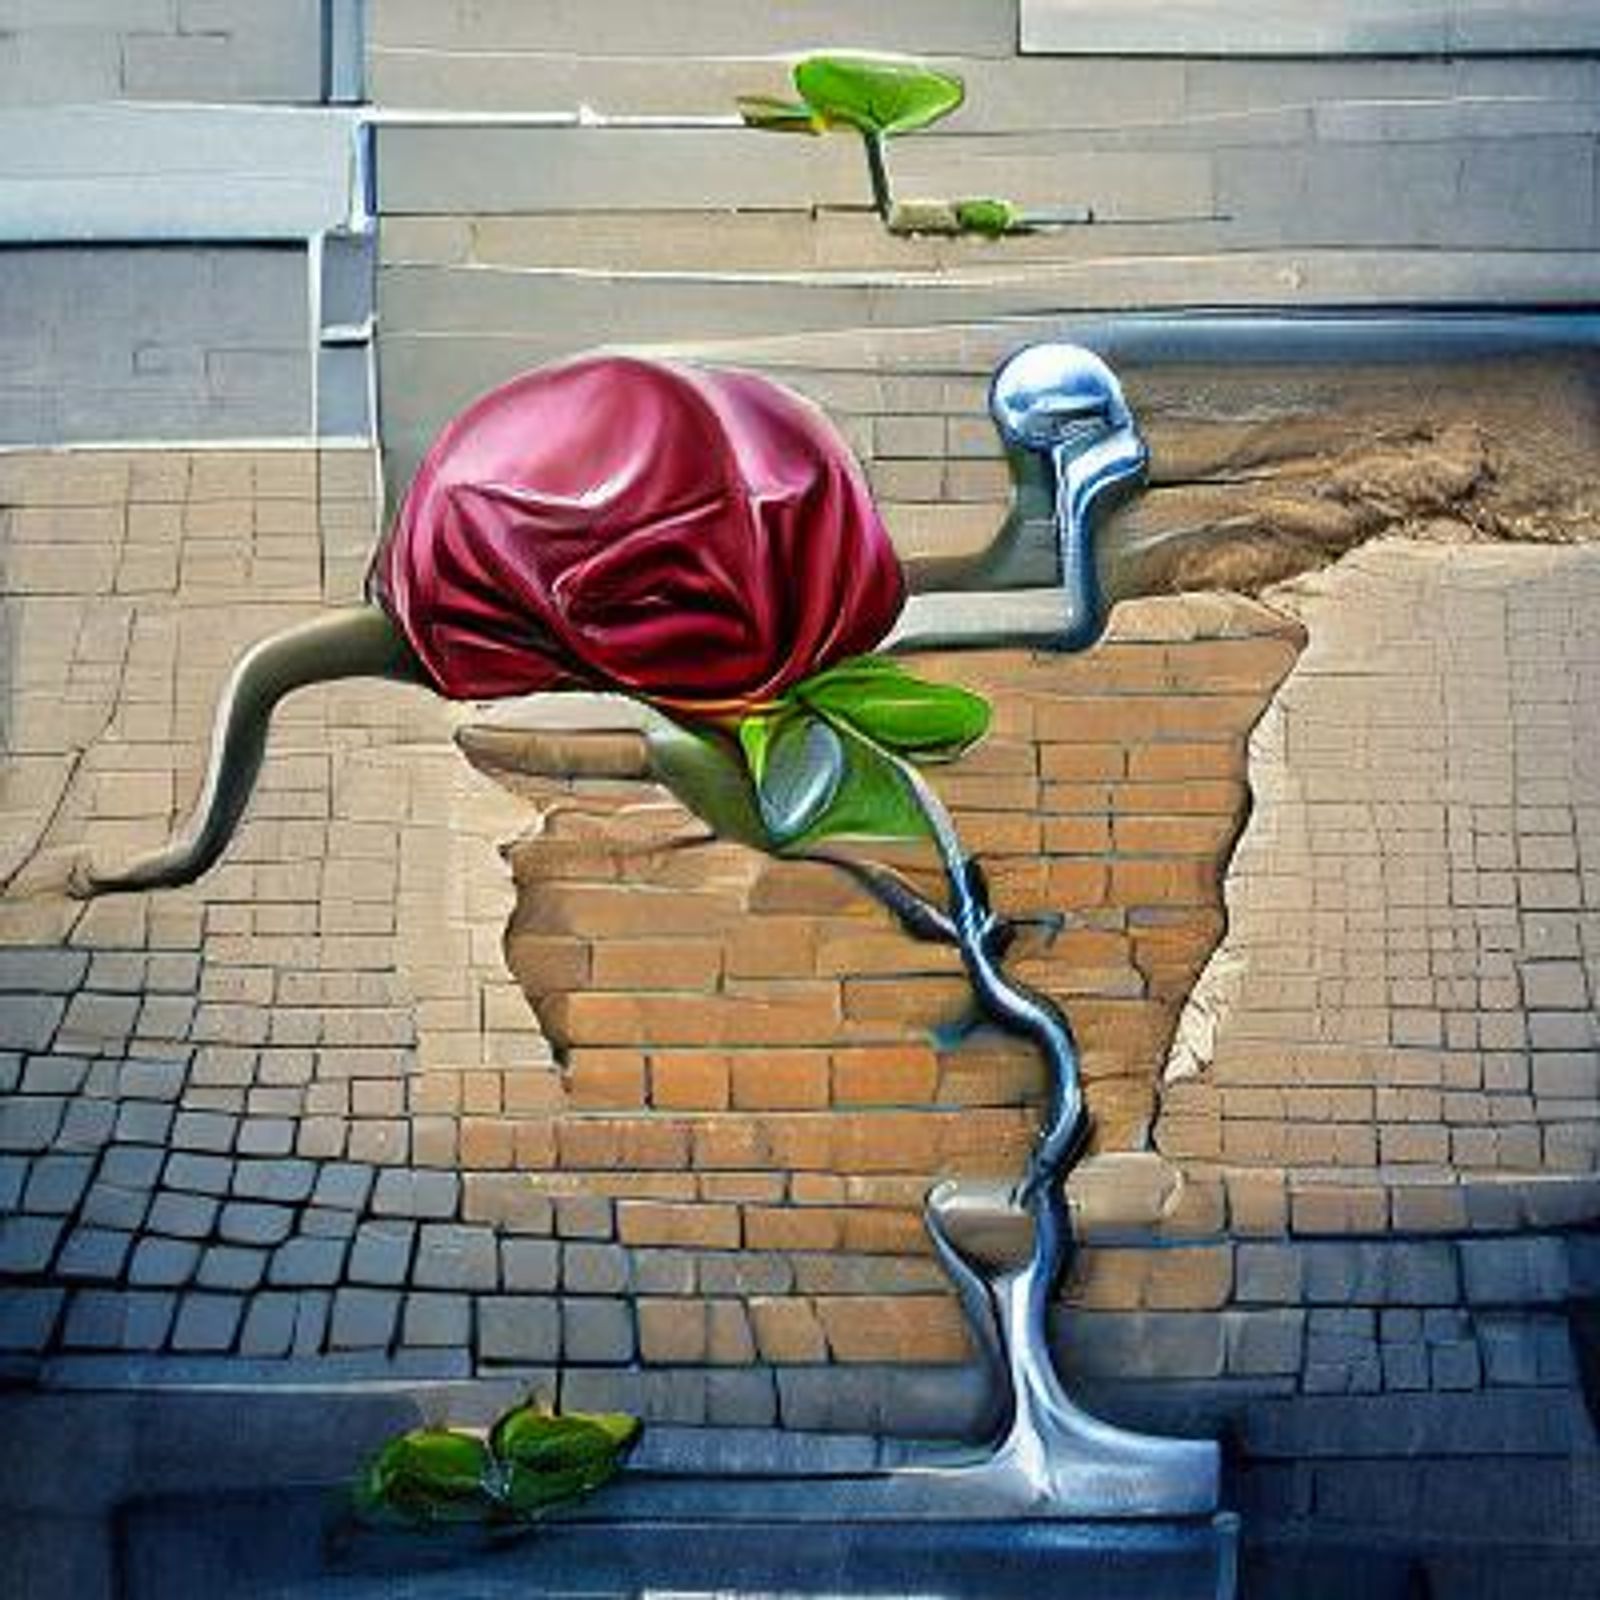 the rose that grew from concrete drawings